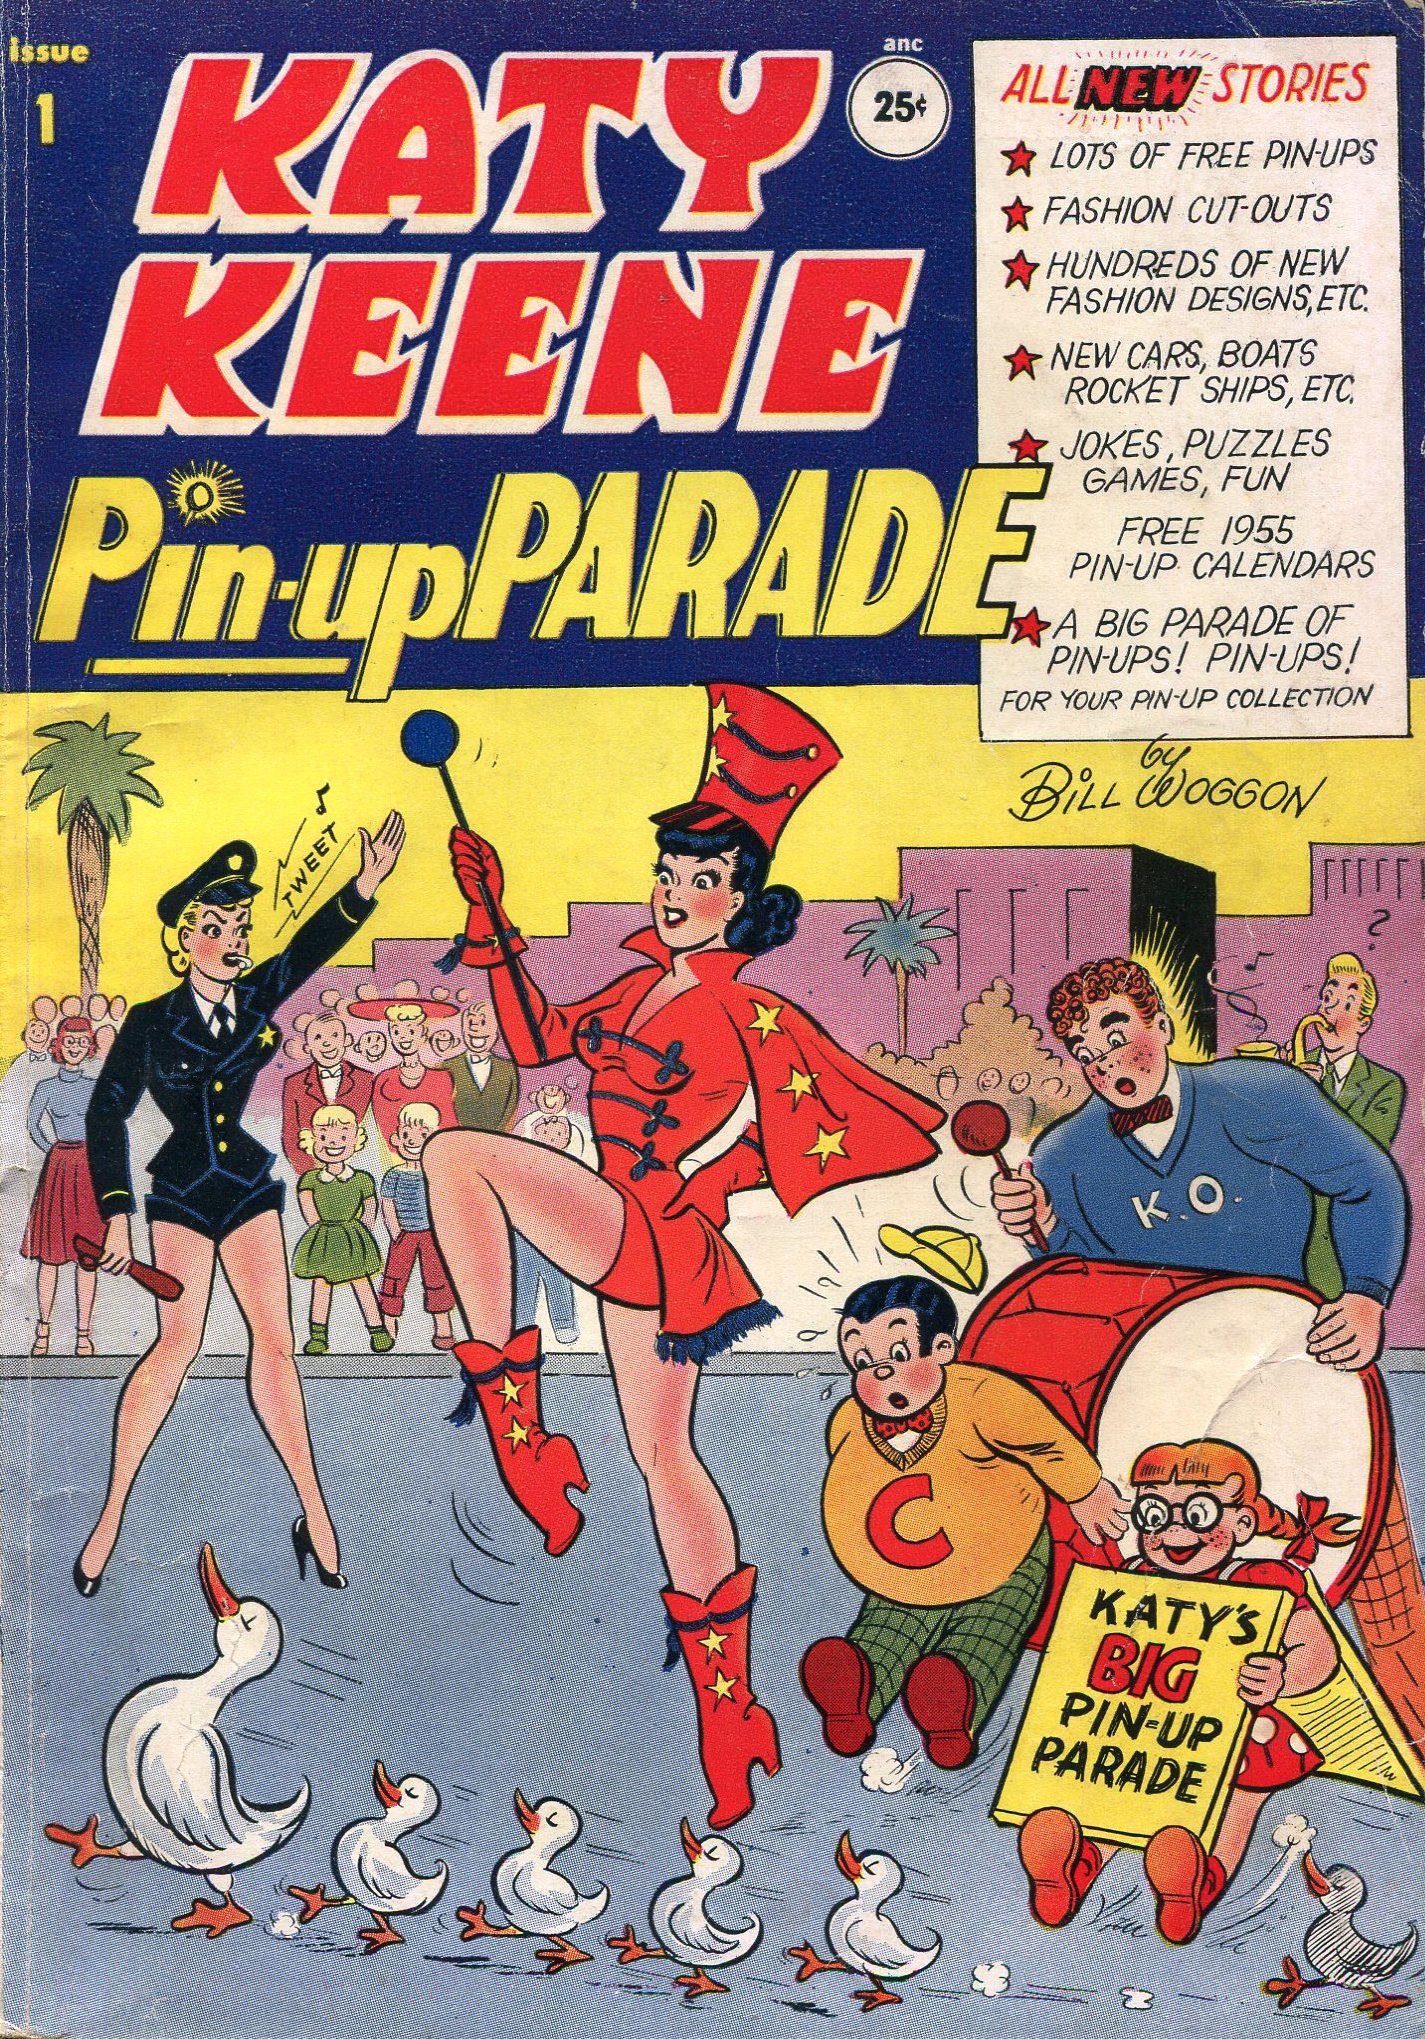 Katy Keene Pin-up Parade issue 1 - Page 1